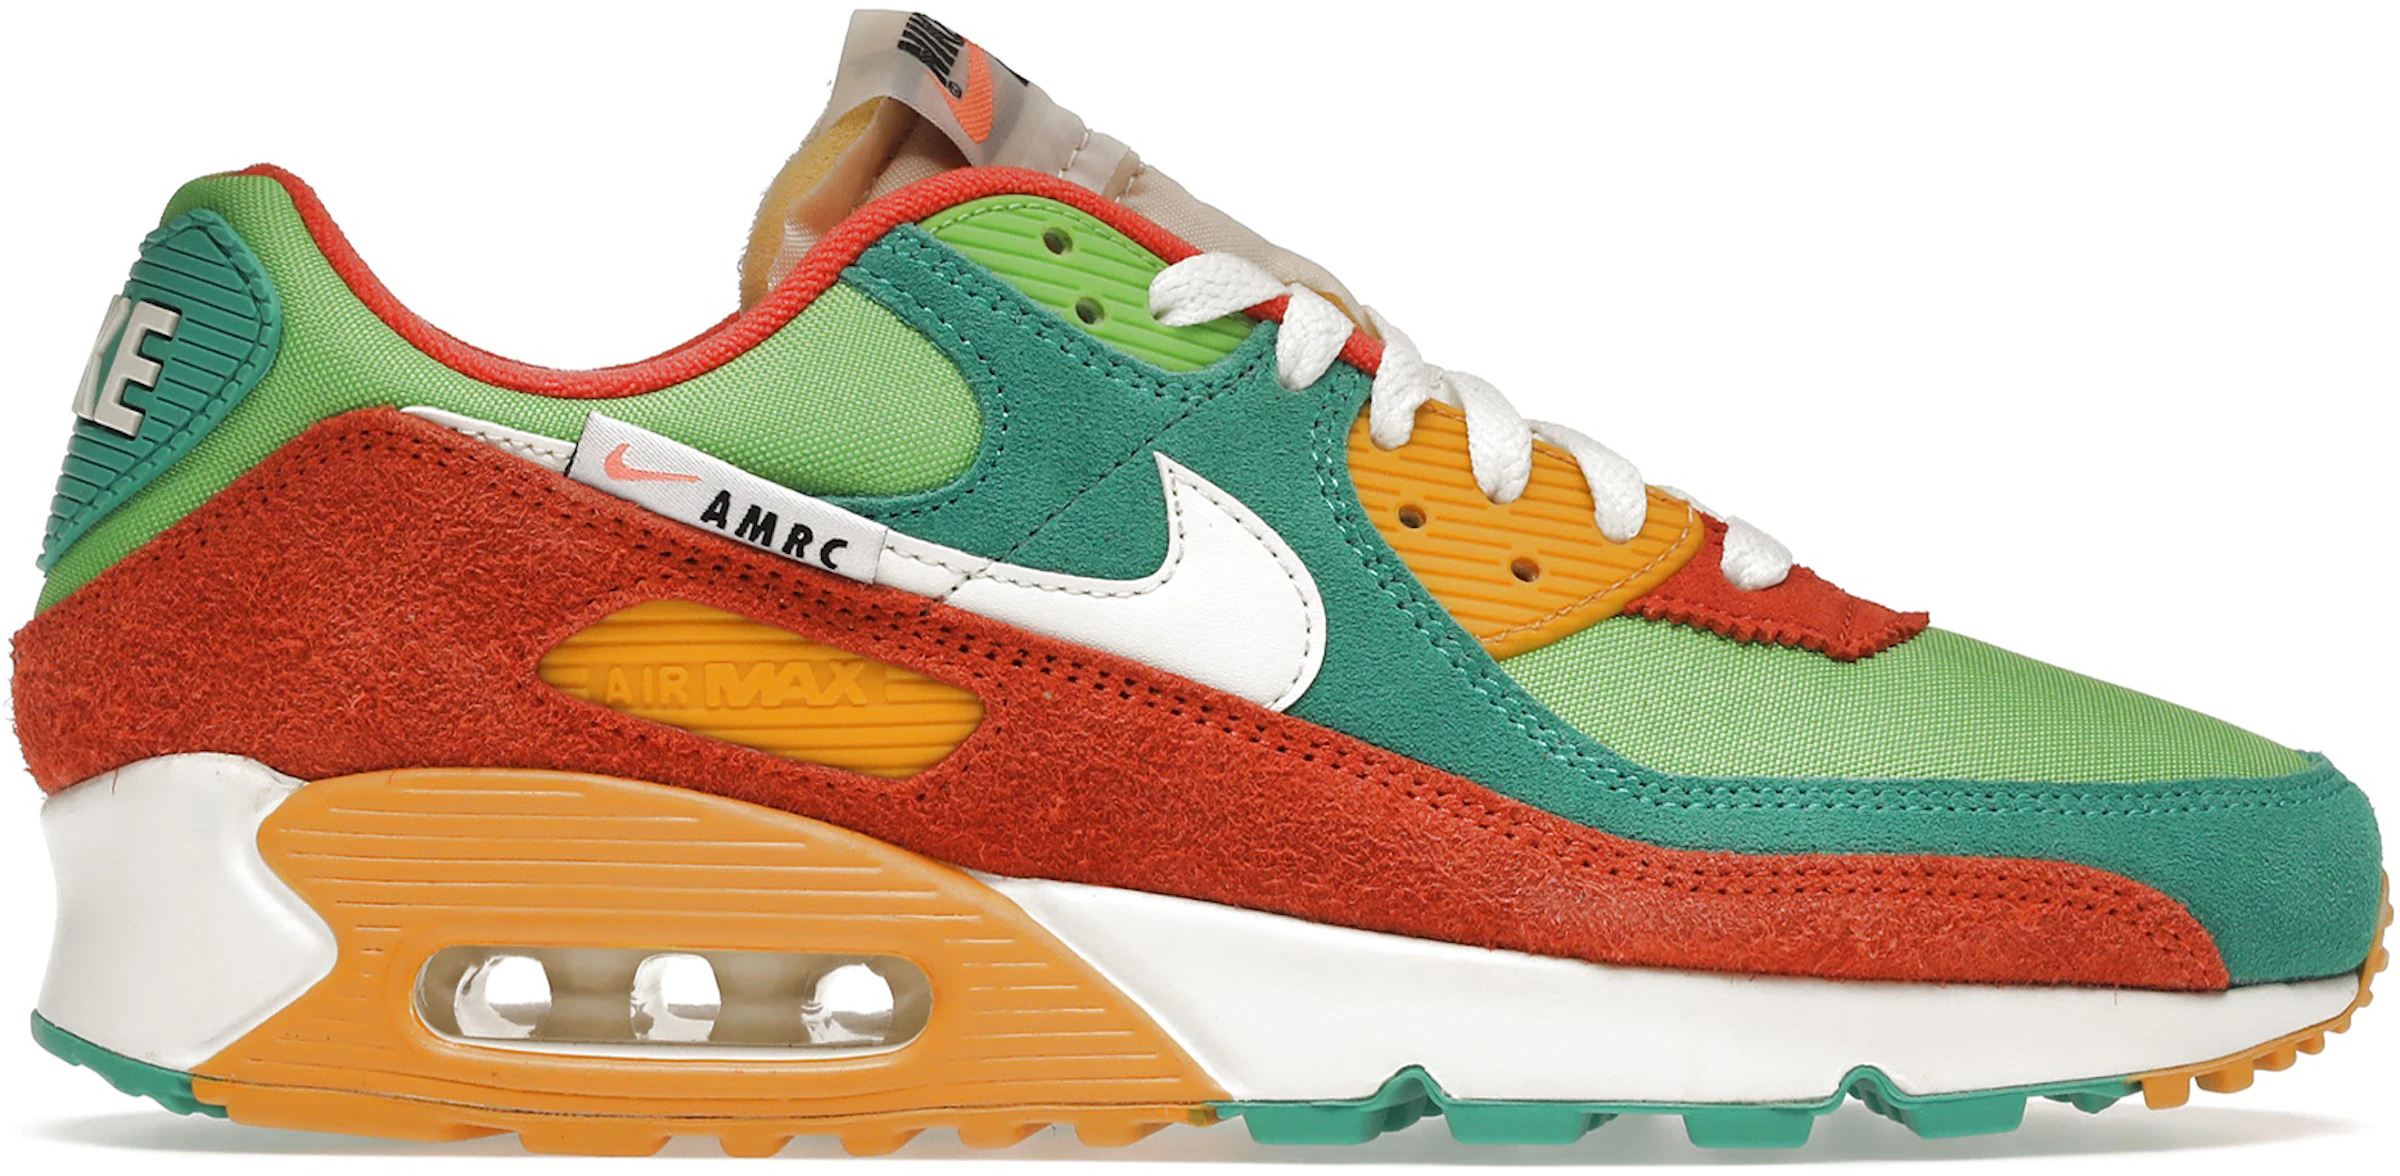 Air Max 90 - All Sizes & Colorways at